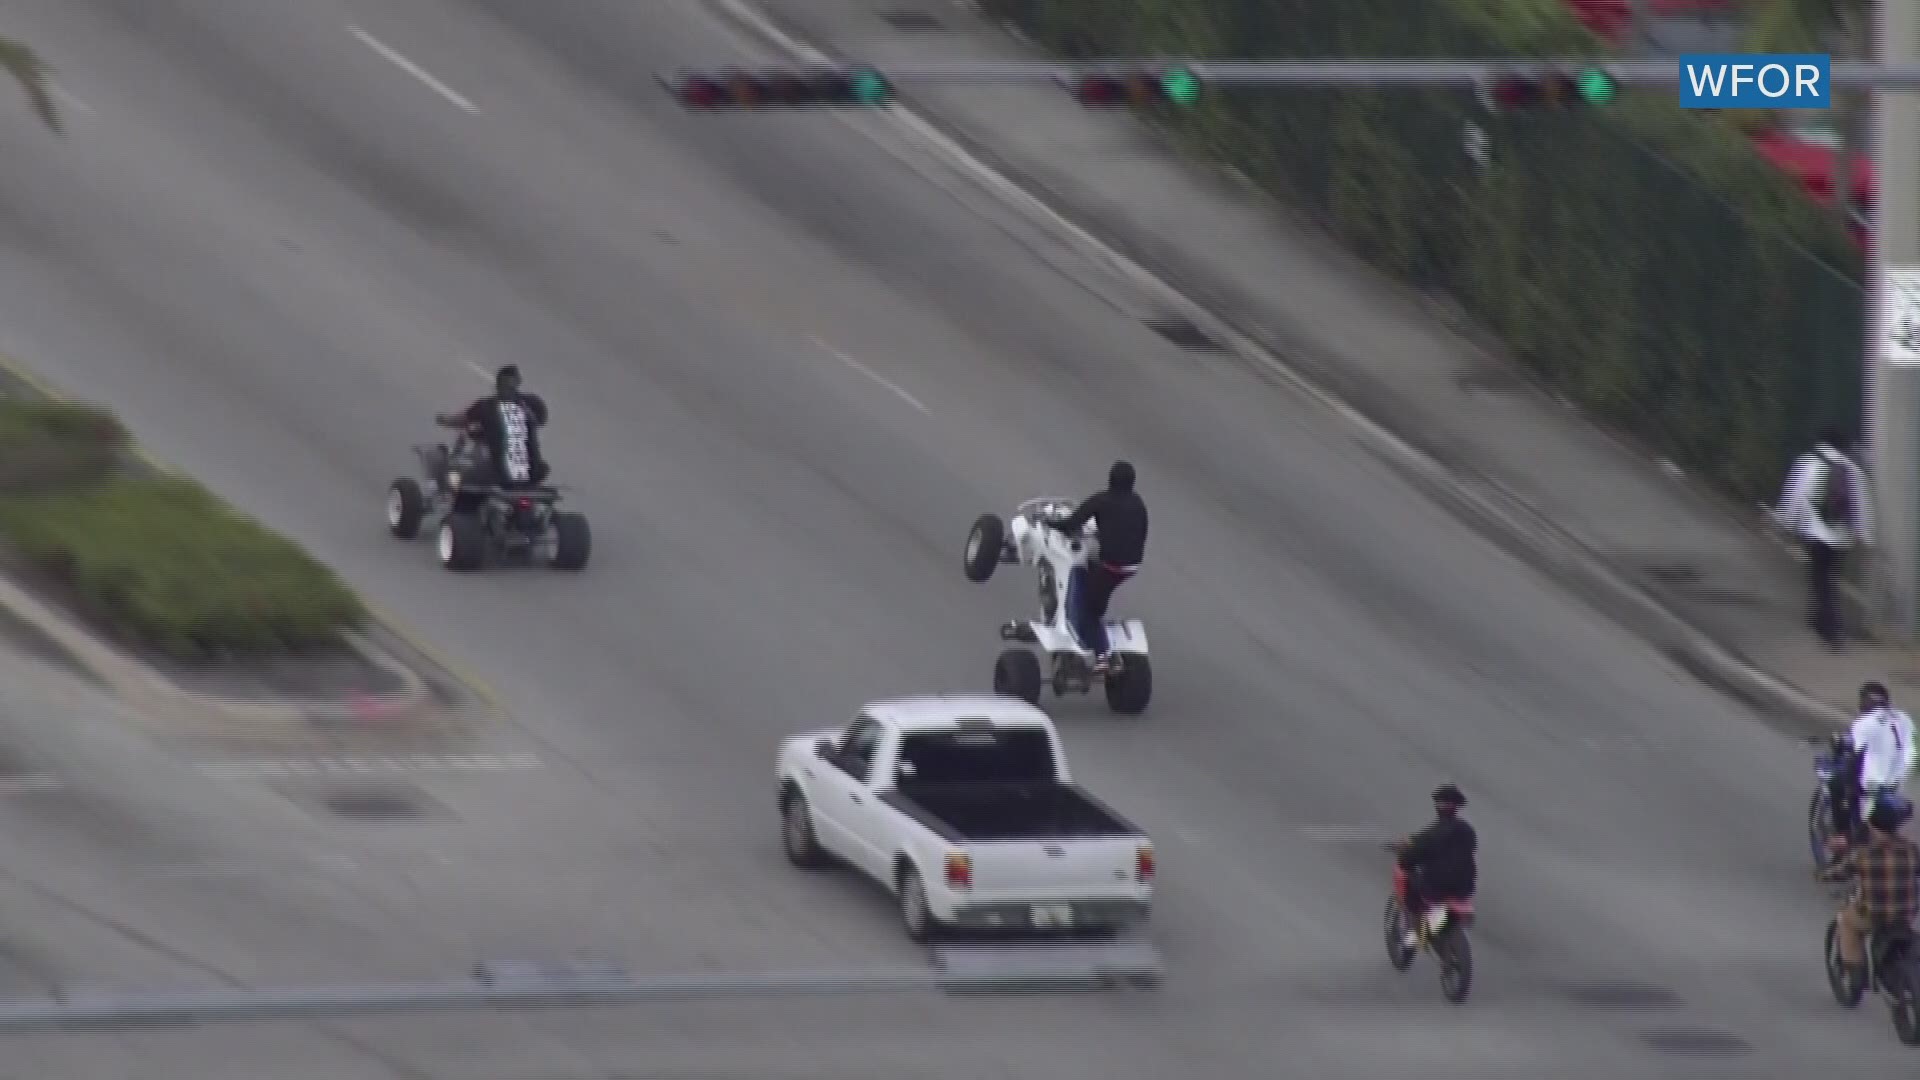 Several people have been arrested in what police call a dangerous and illegal "Wheels Up, Guns Down" ride-out event in South Florida, WFOR-TV reports.